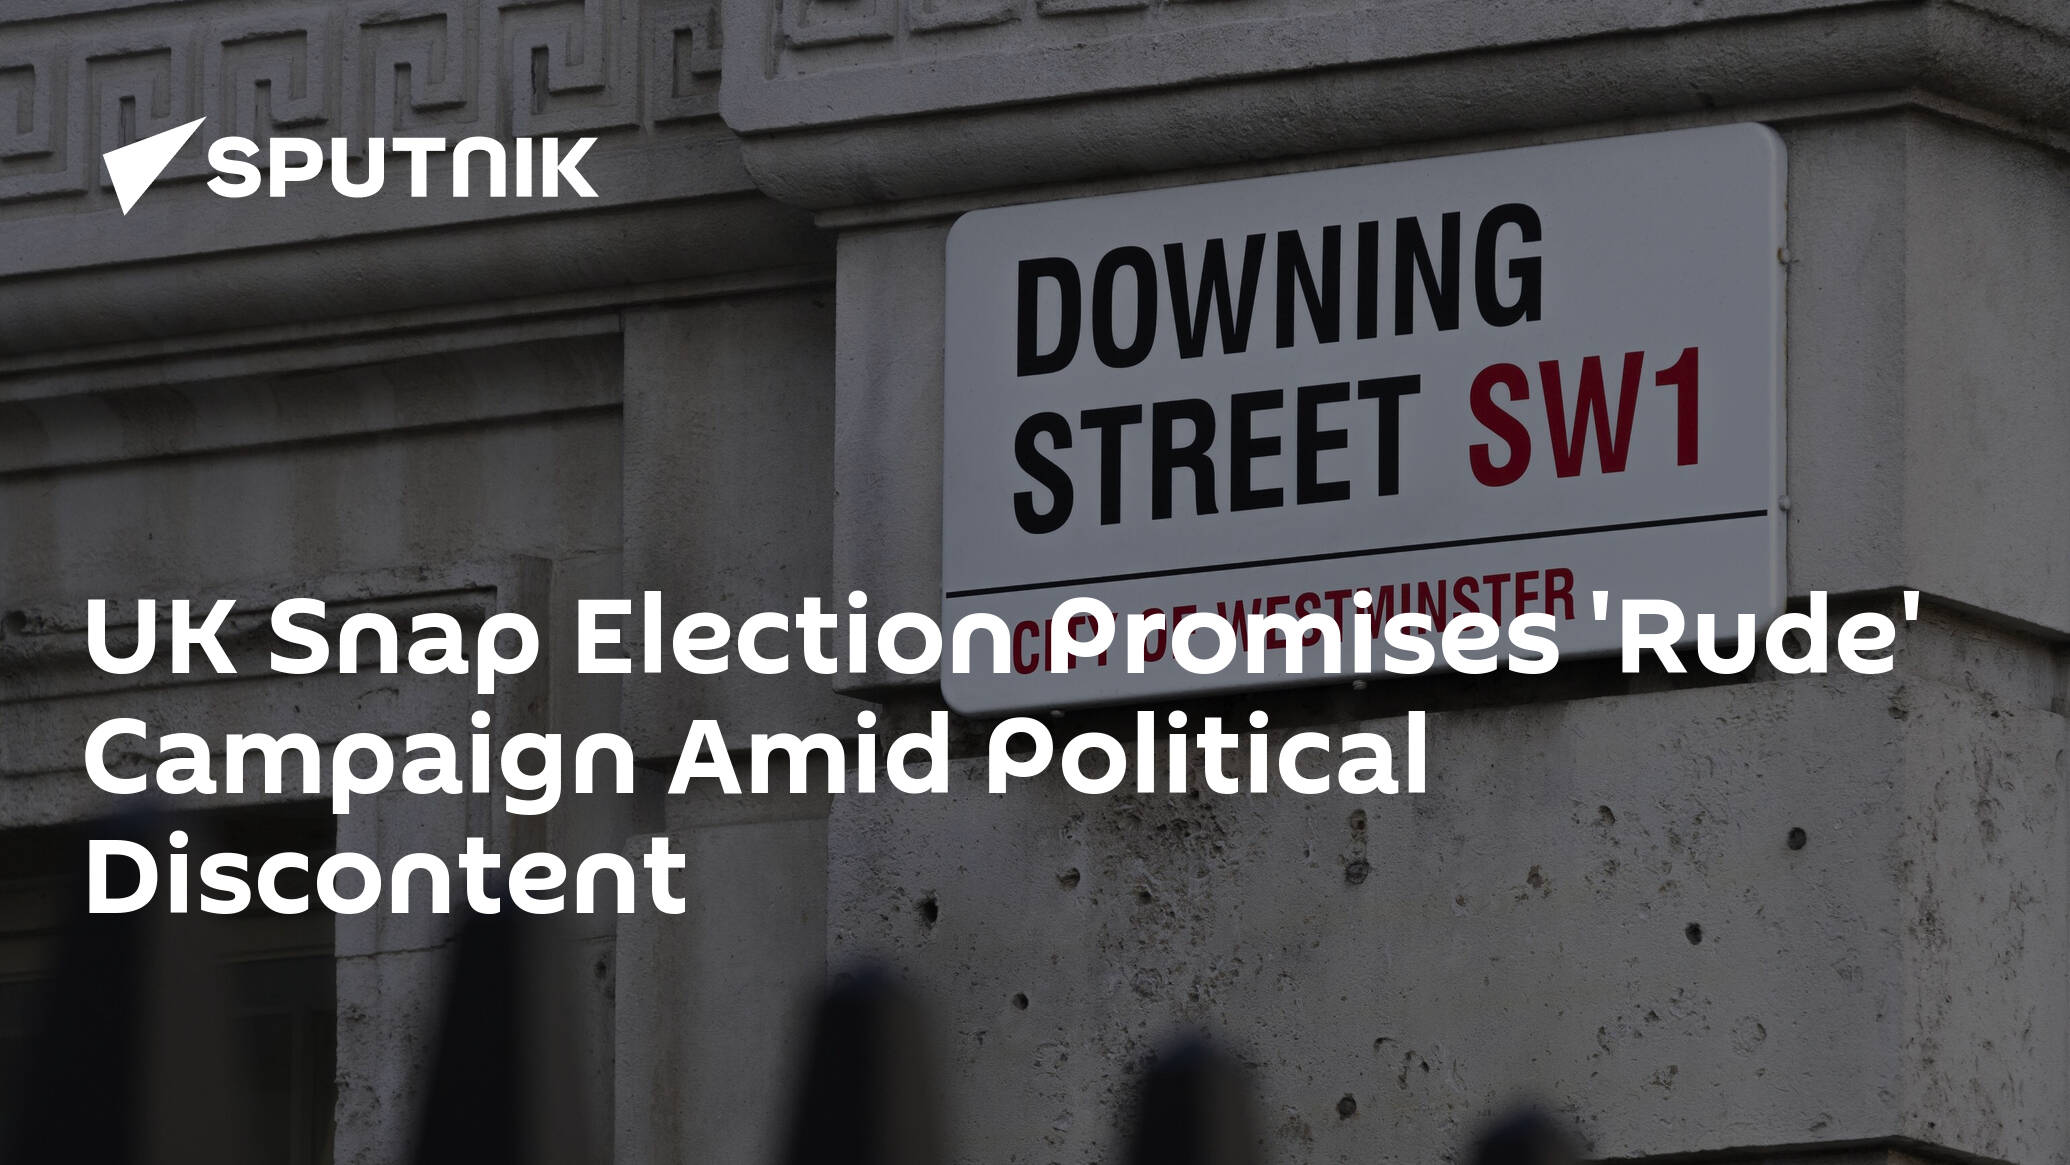 UK Snap Election Promises 'Rude' Campaign Amid Political Discontent